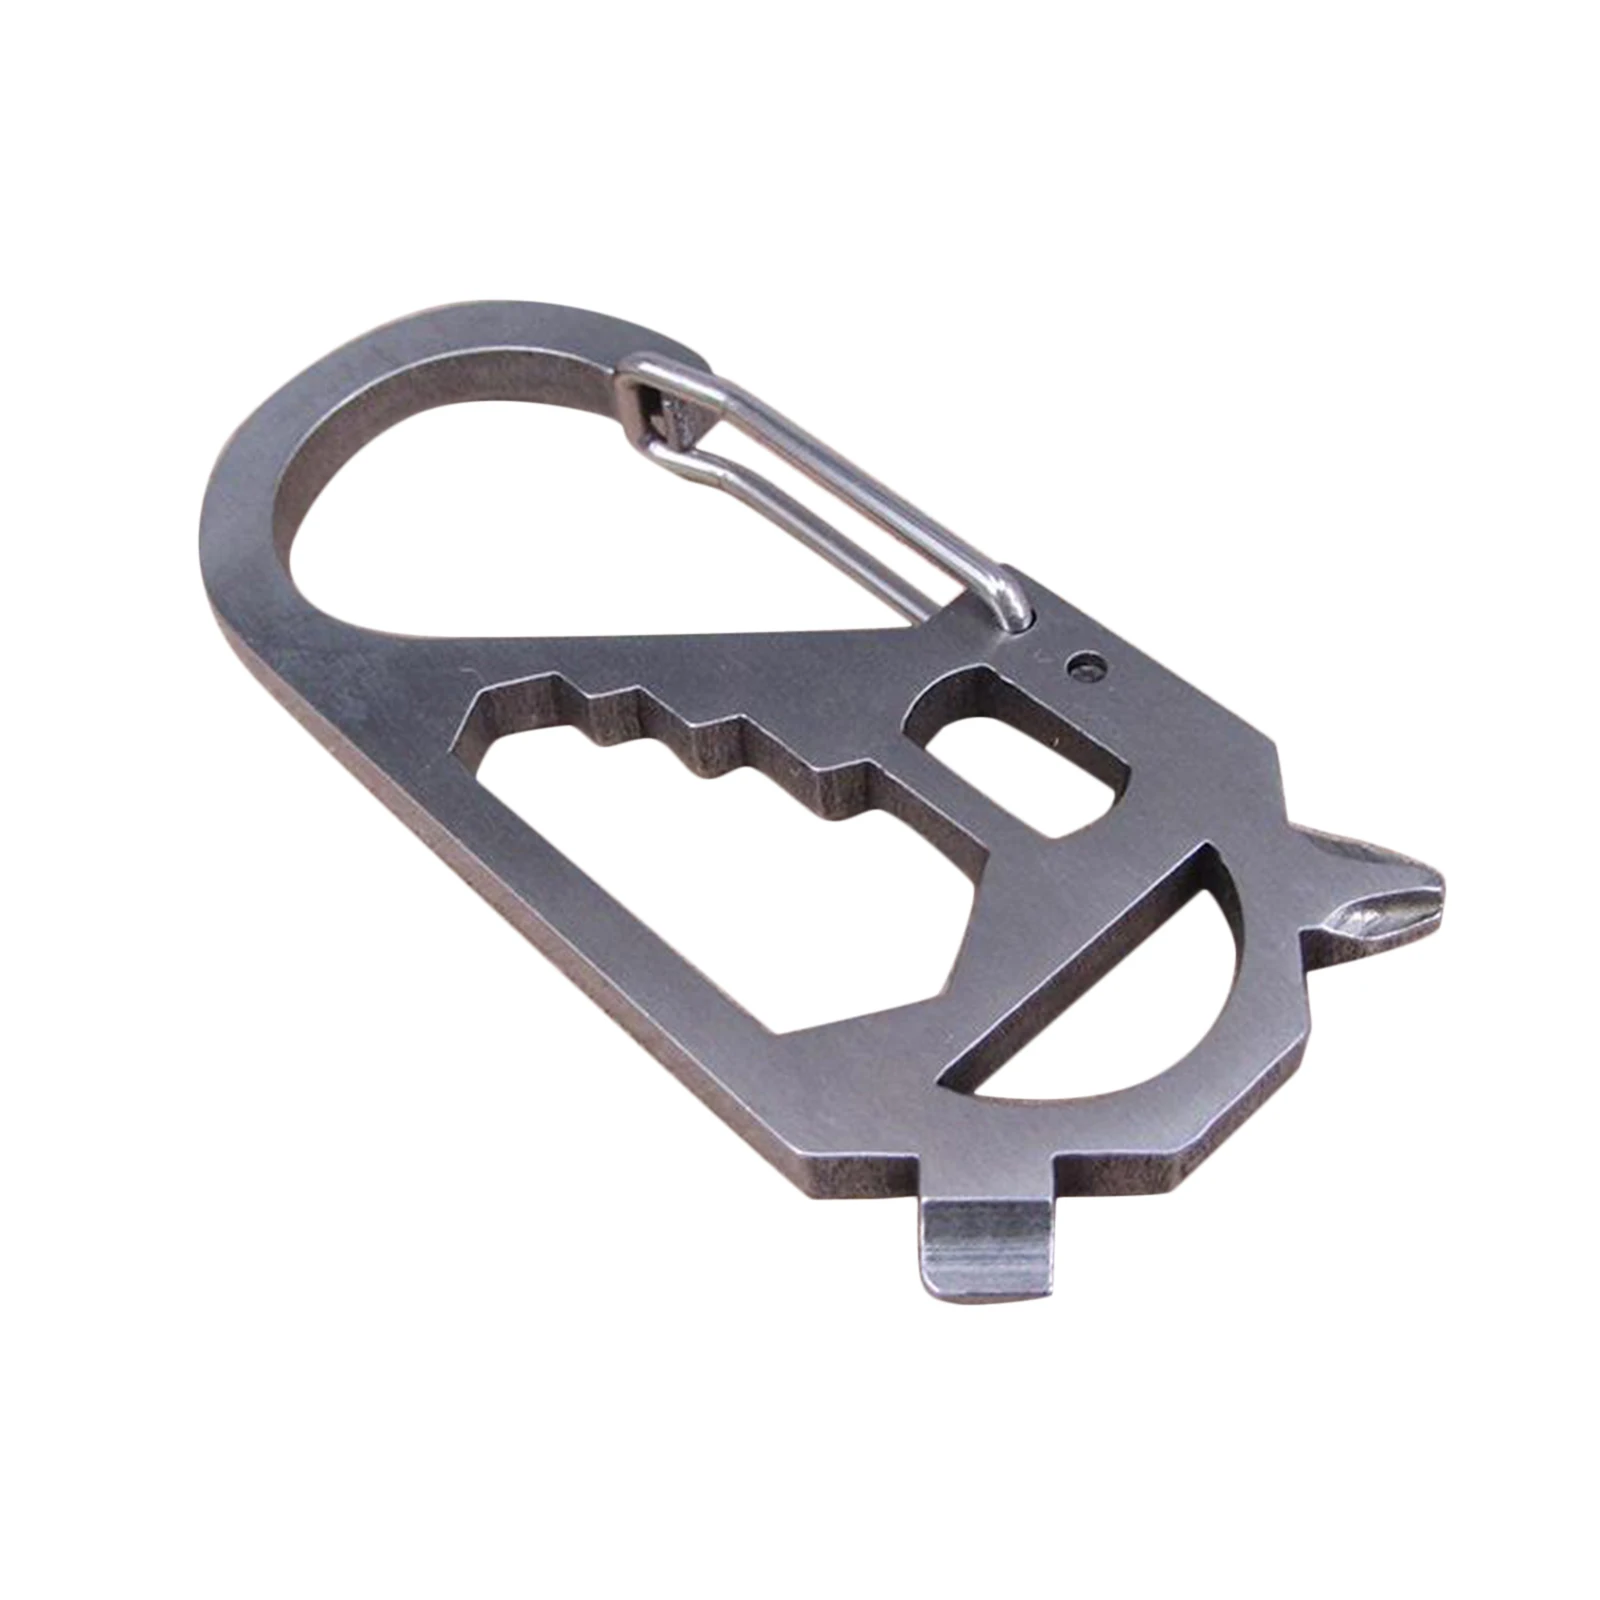 Stainless Steel NonLocking Carabiner Ring Hook for Climbing Caving Clip Buckle